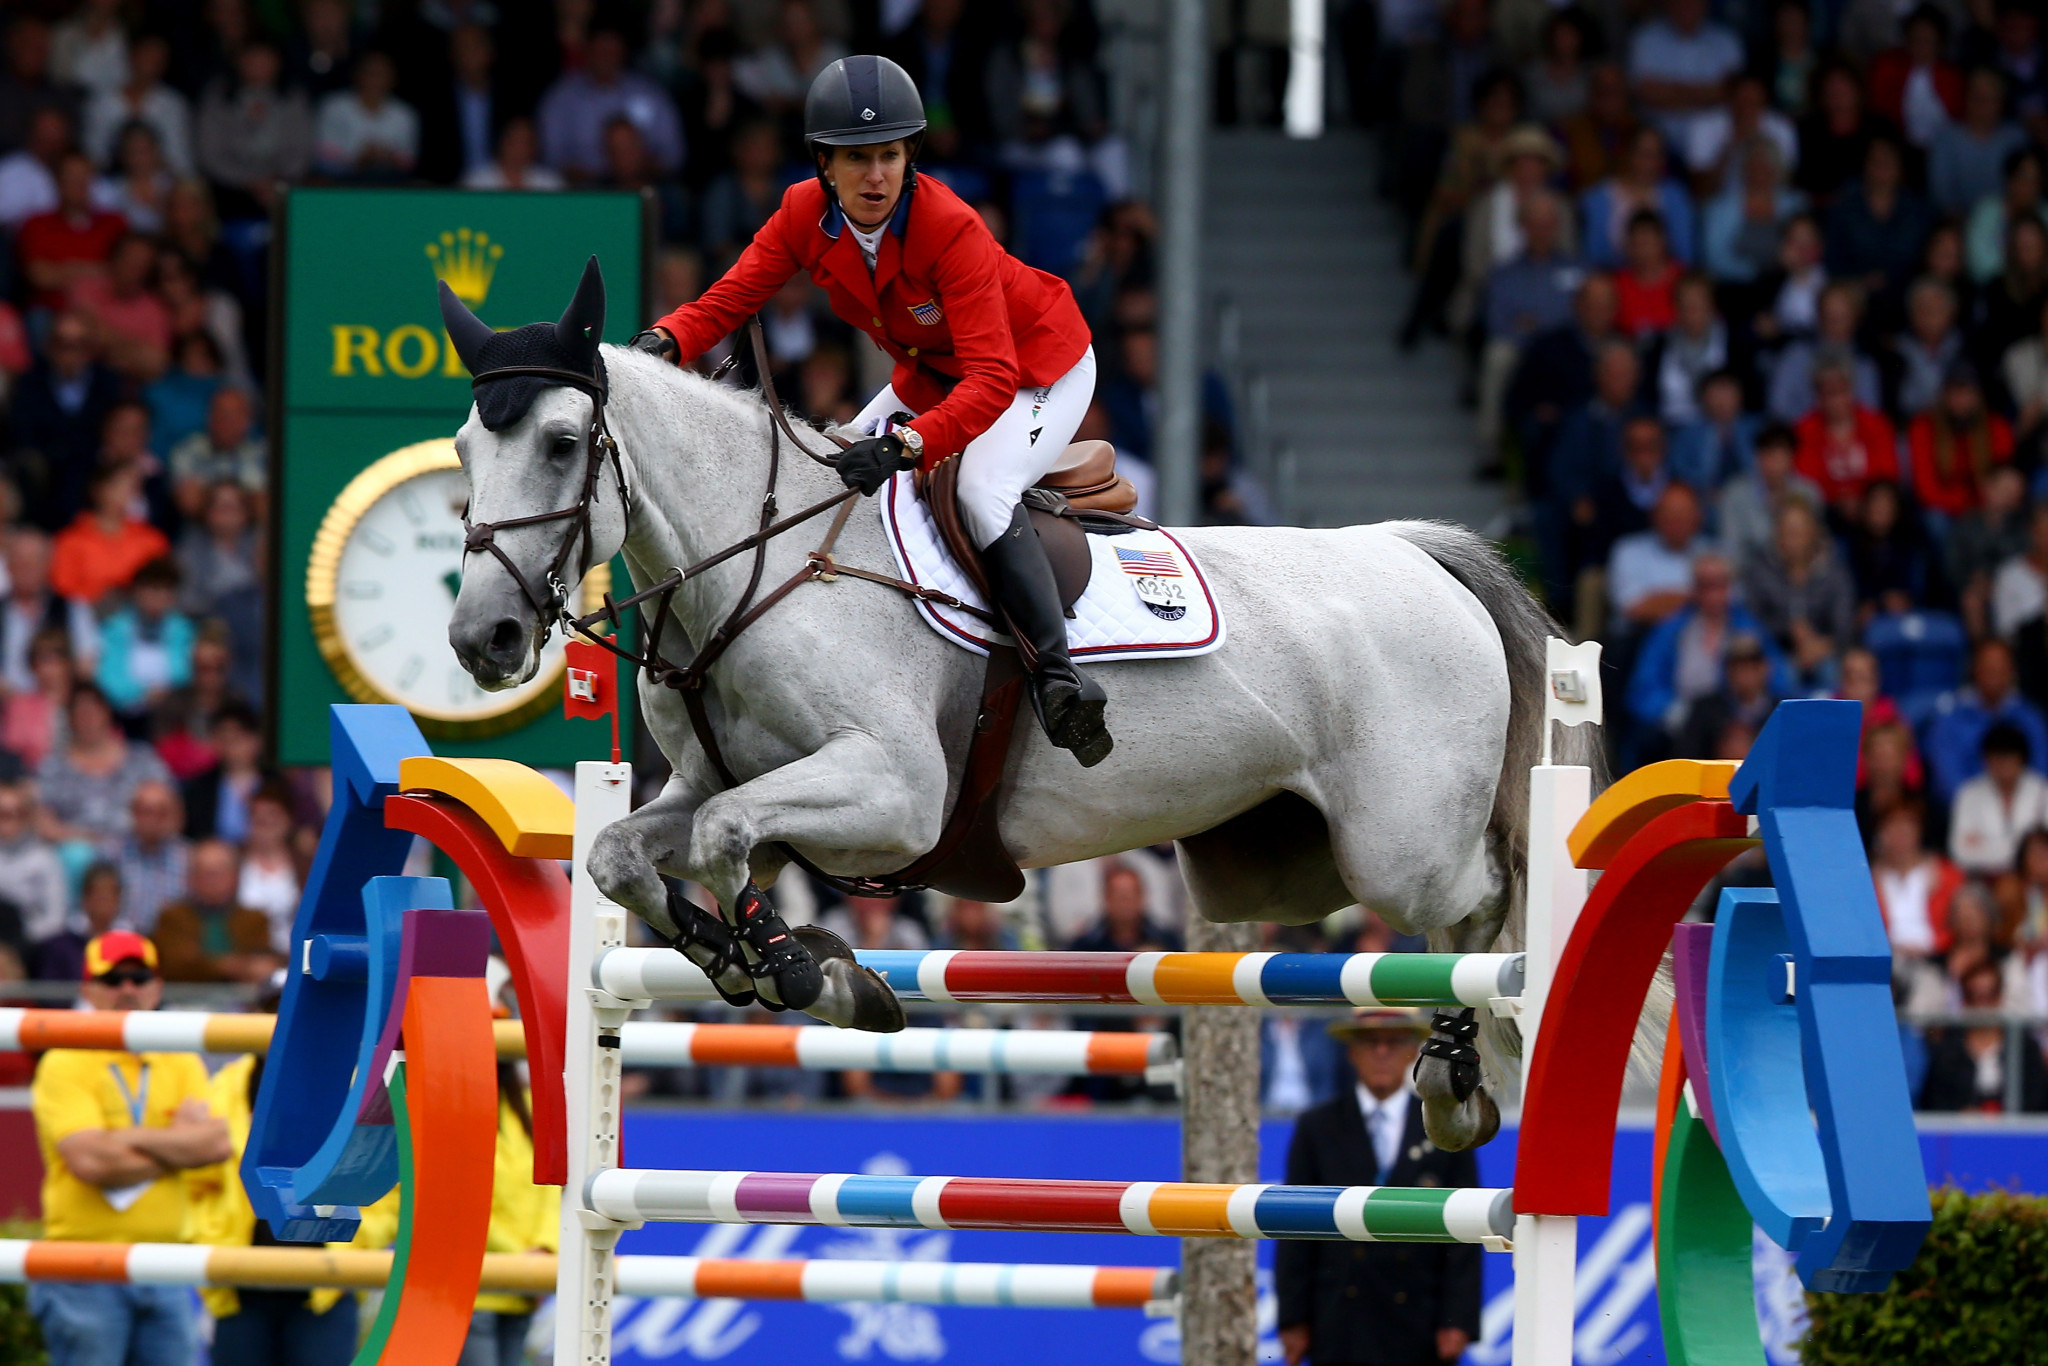 Fifteen countries to ride for glory at FEI Jumping Nations Cup Final 